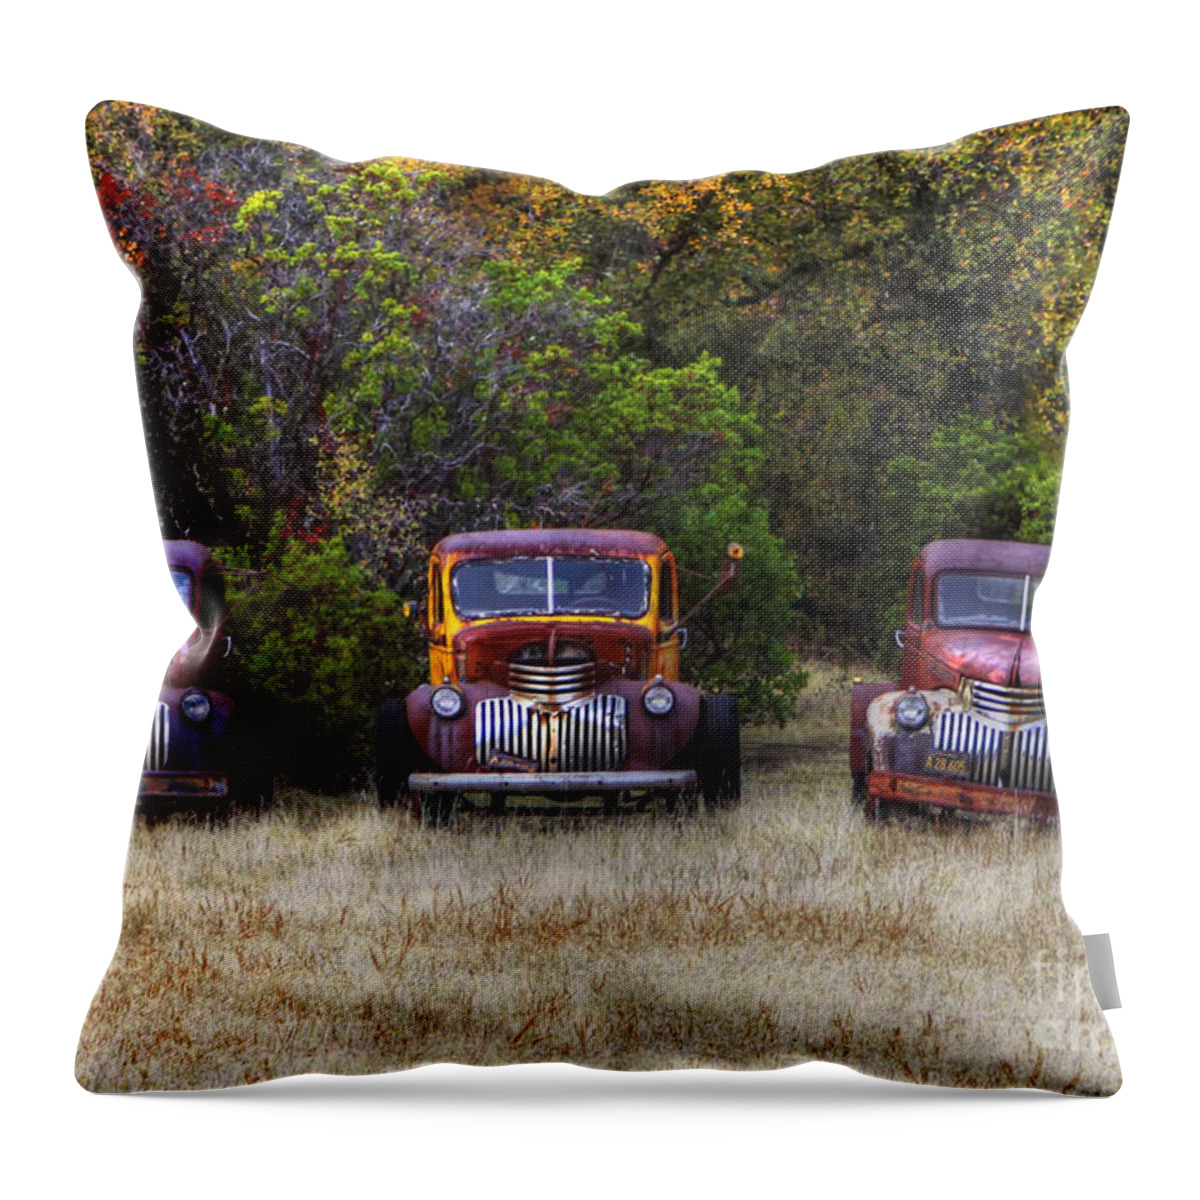 Trucks Photos Throw Pillow featuring the photograph Three Old Friends by Kandy Hurley